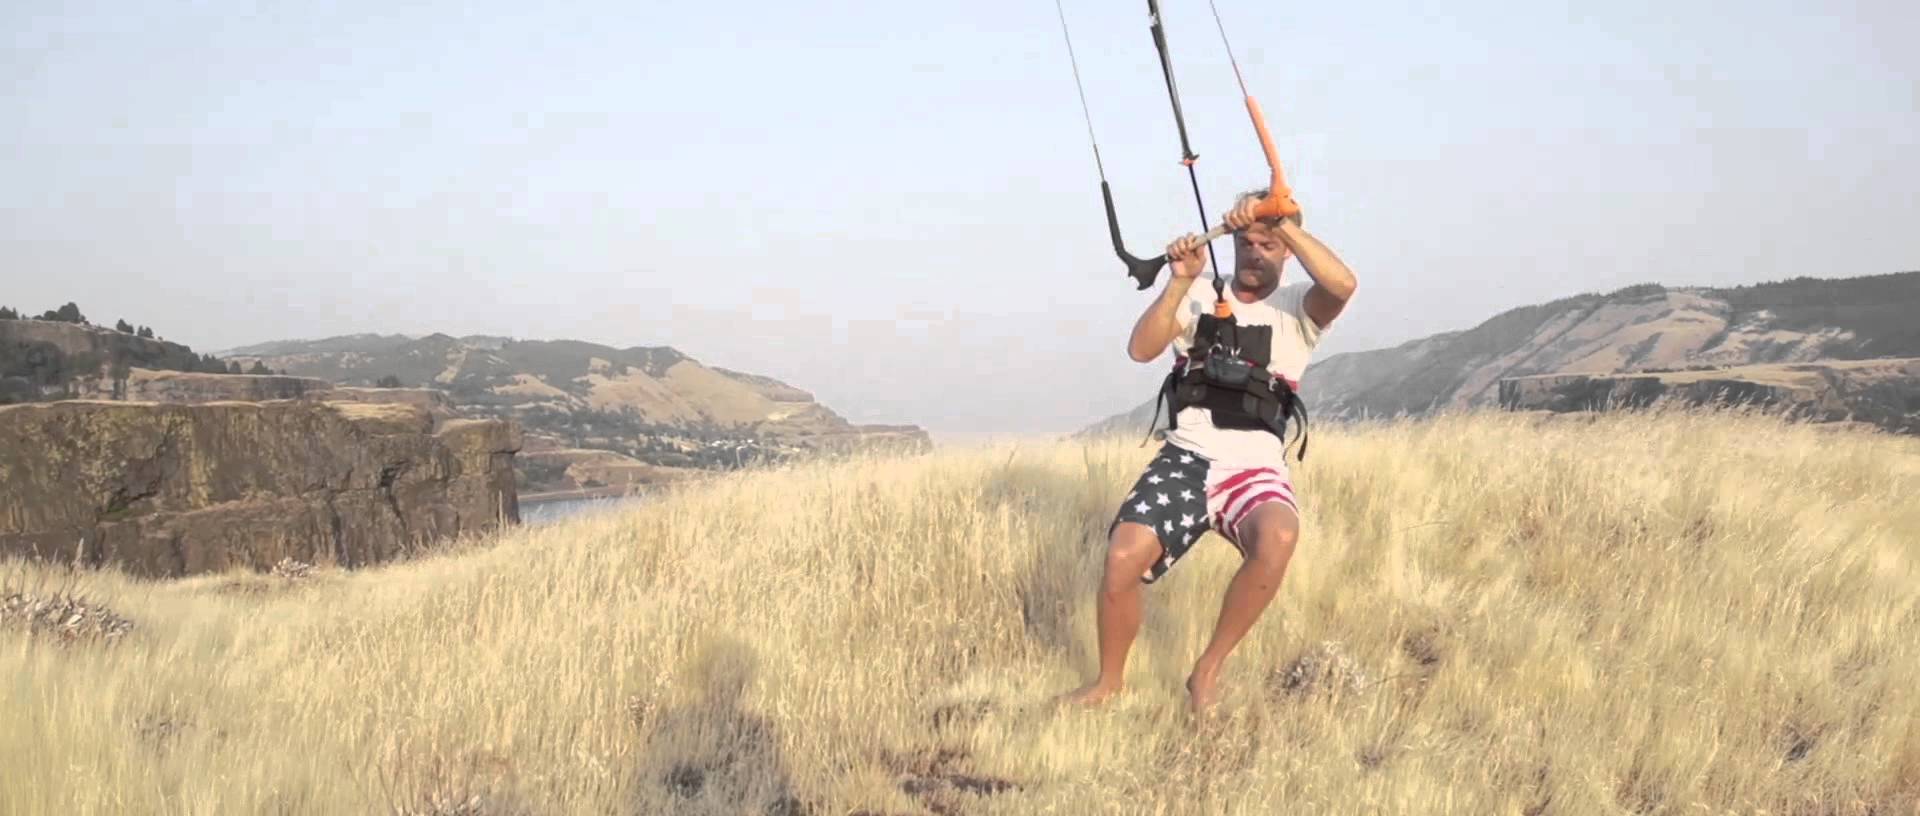 this is kiteboarding - THIS is Kiteboarding